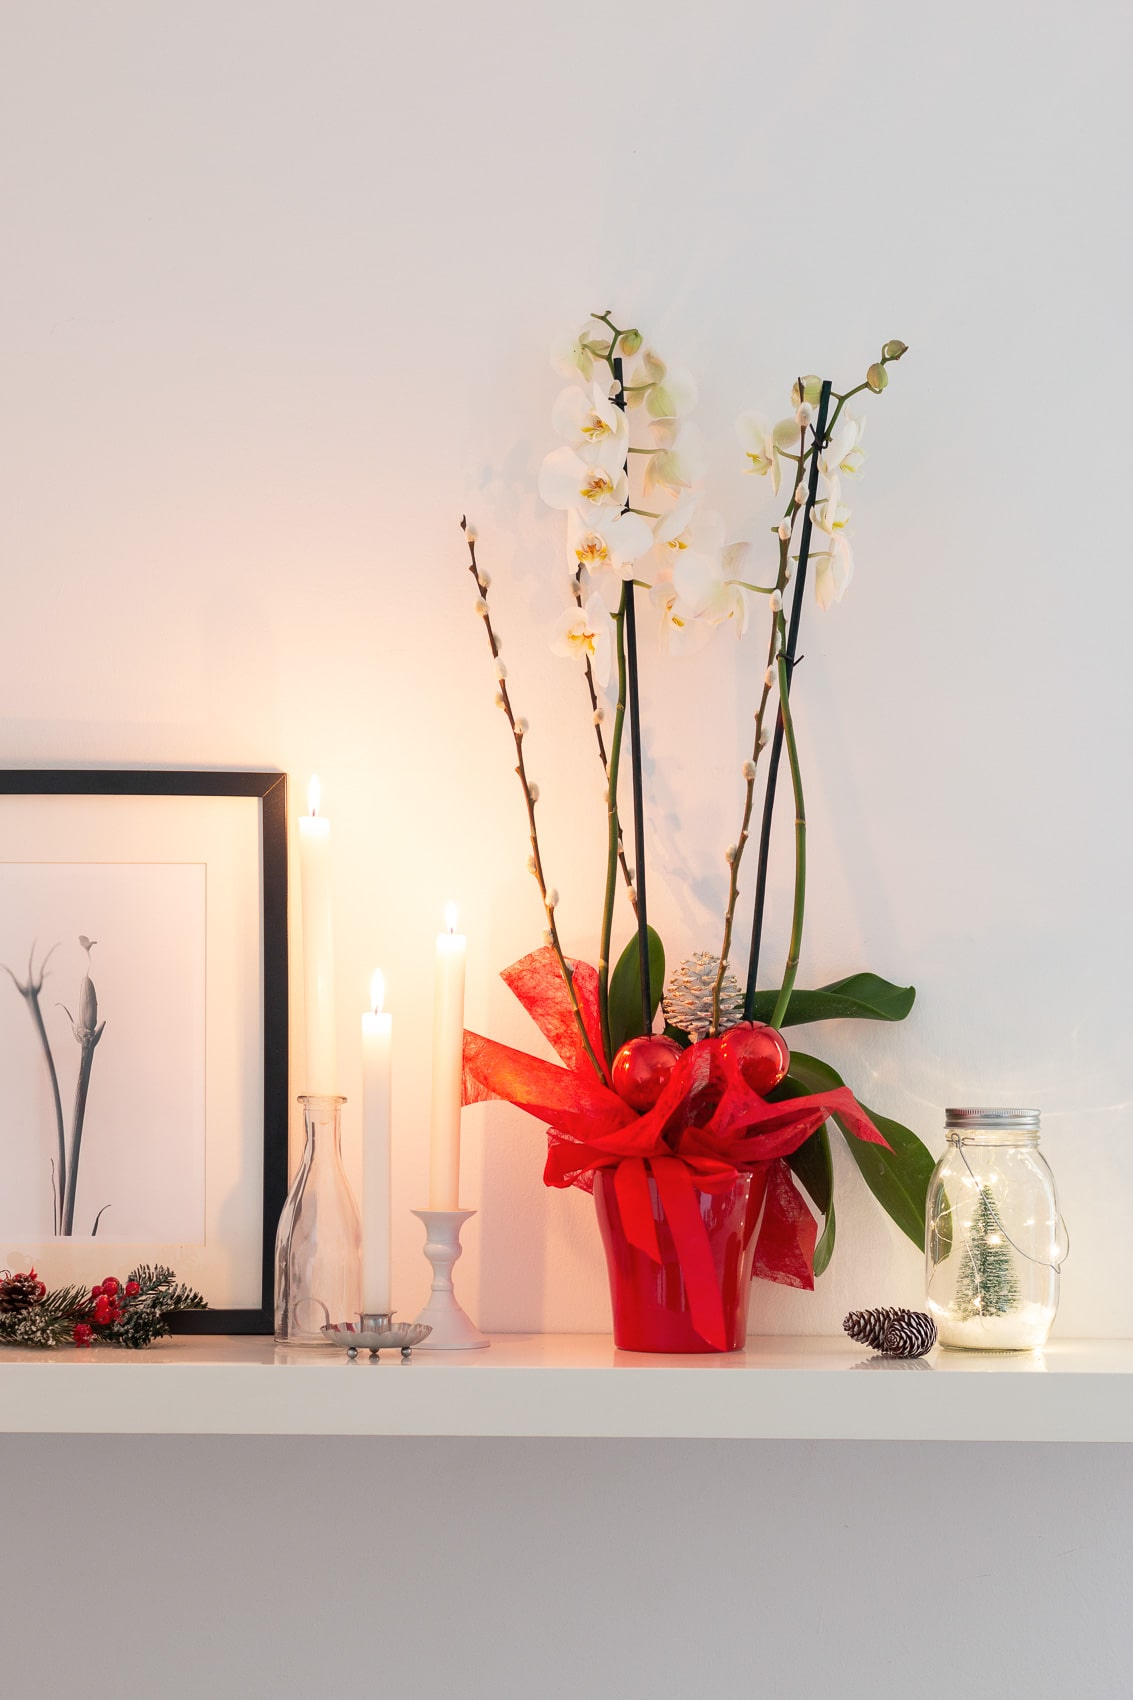 white orchid with decorations called Comet